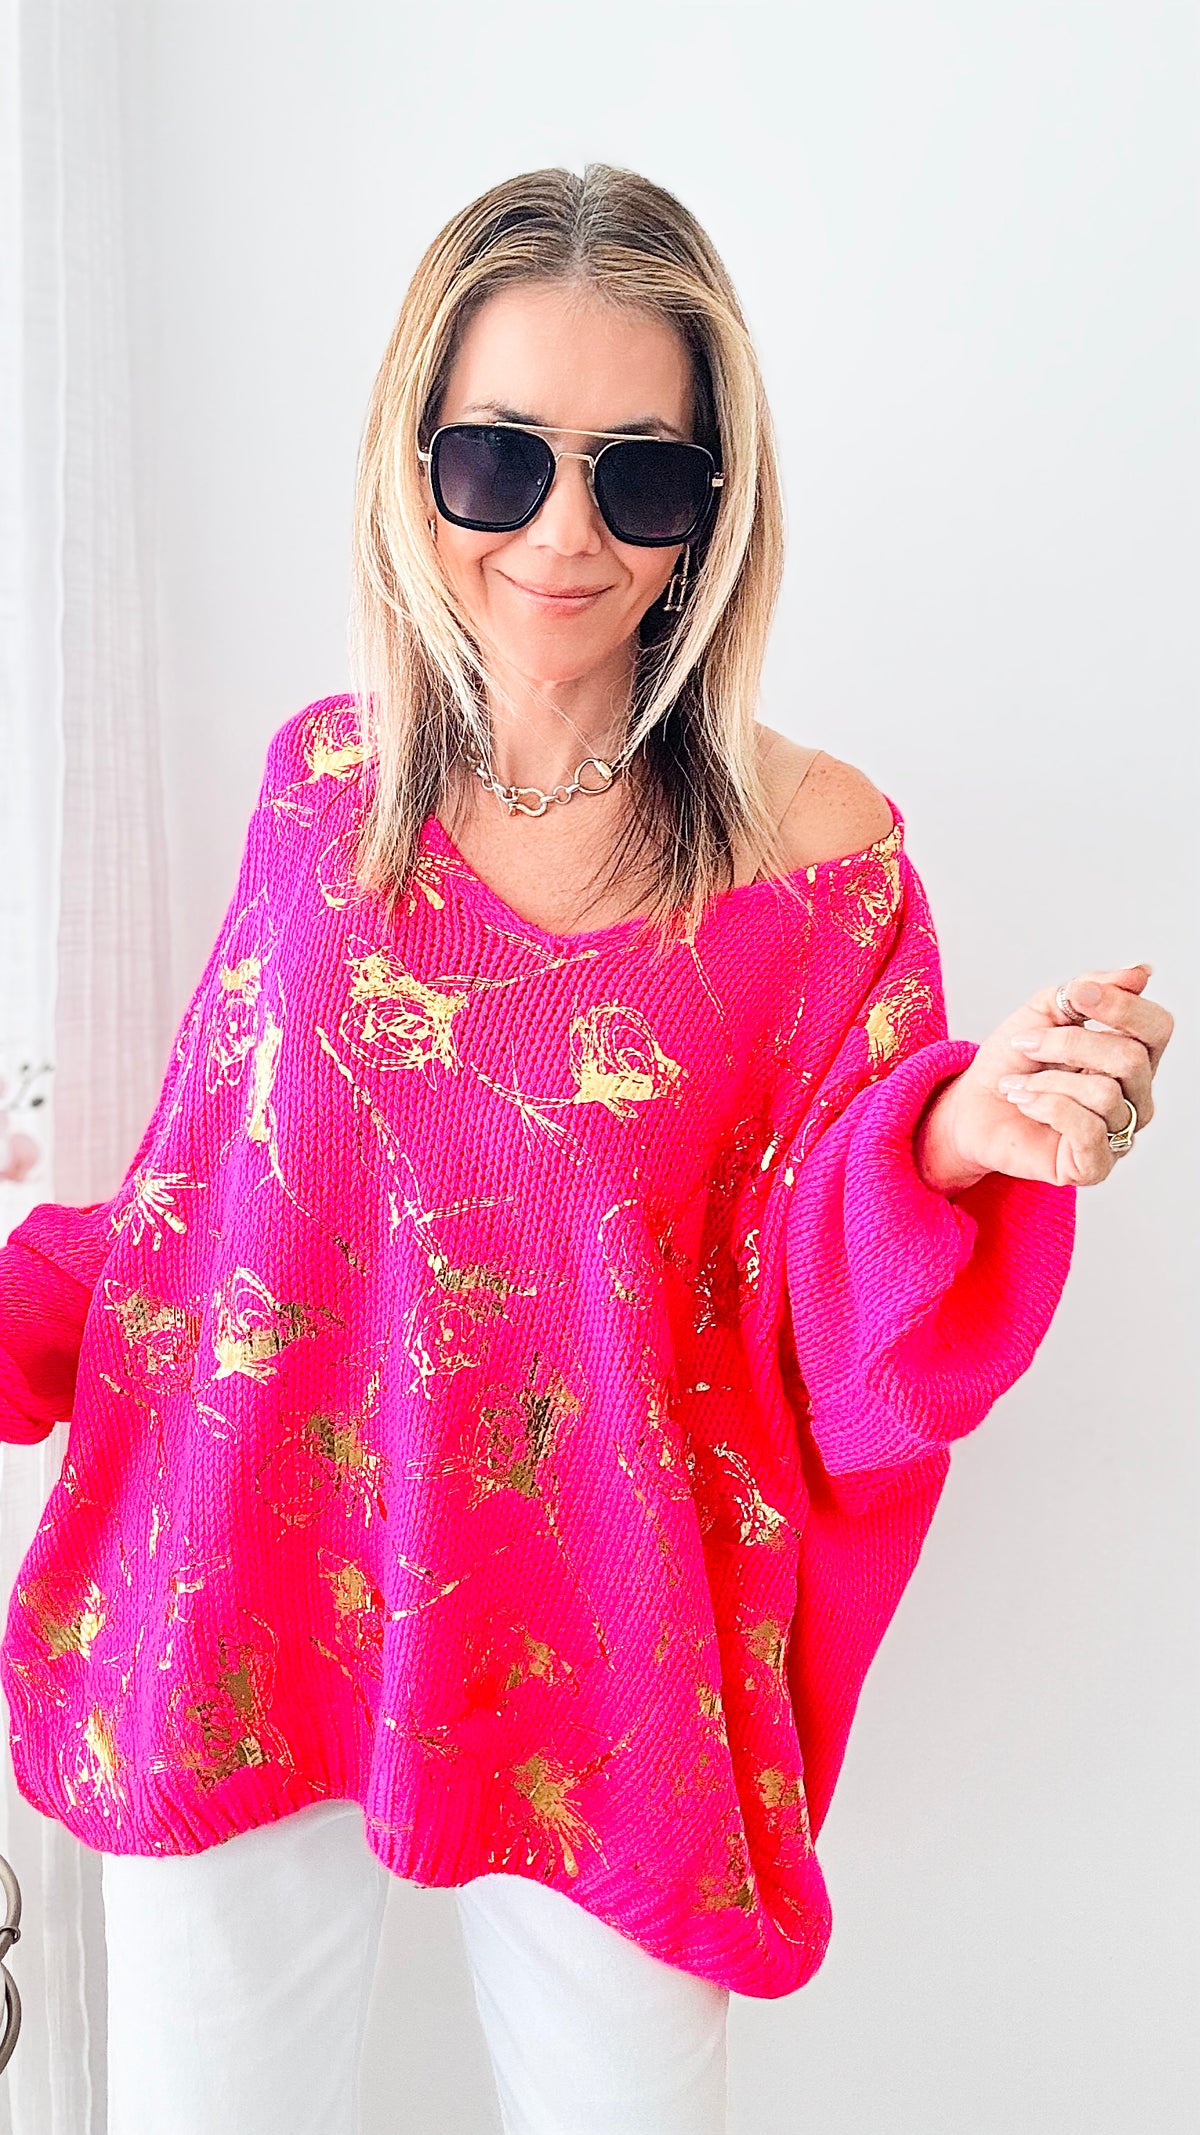 Gold Foil Italian Rose Knit Sweater - Neon Hot Pink-140 Sweaters-Germany-Coastal Bloom Boutique, find the trendiest versions of the popular styles and looks Located in Indialantic, FL